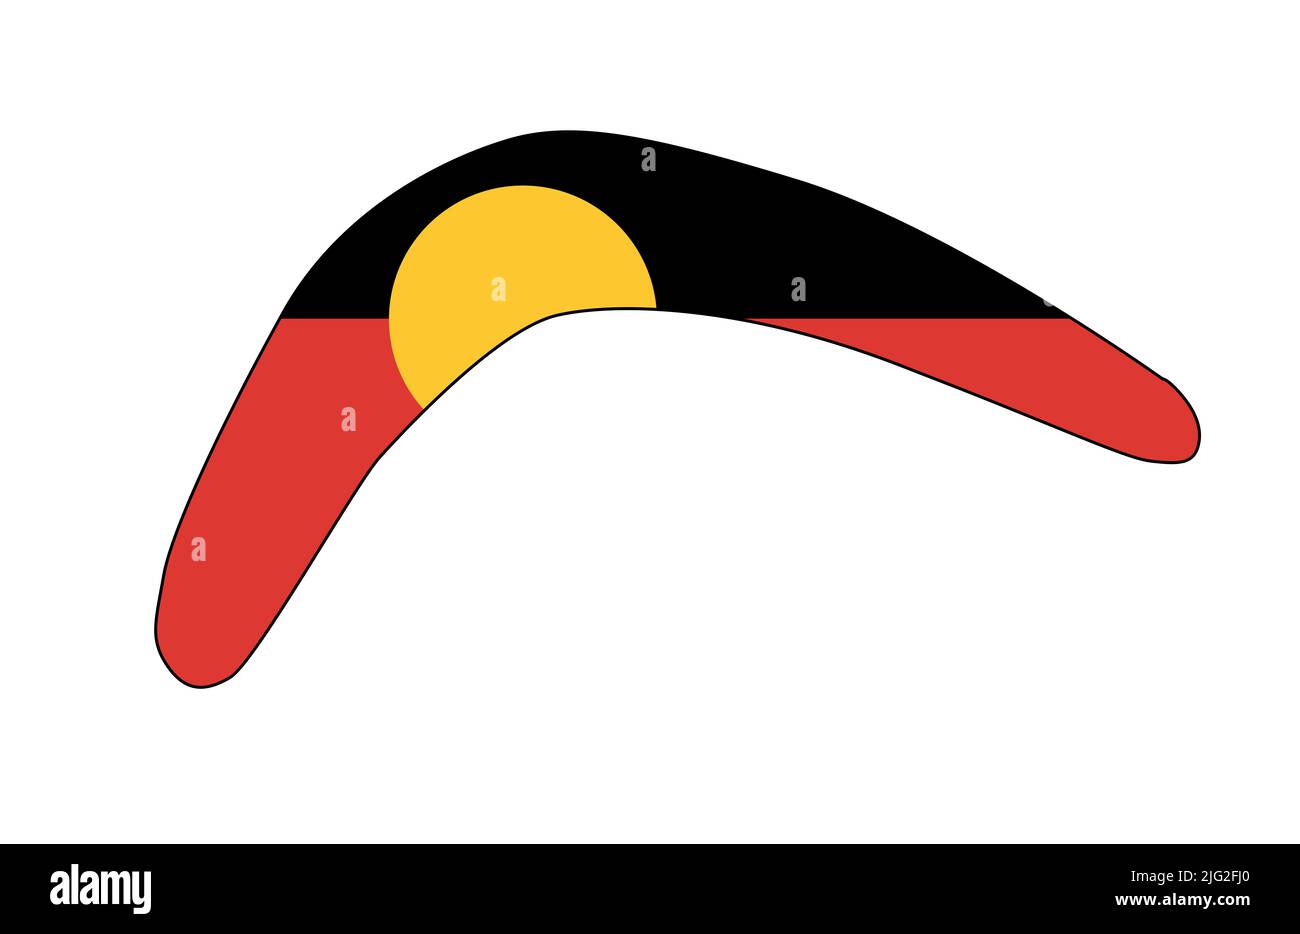 Australian Aborigine flag set within a typical boomerang silhouette over a white background Stock Photo